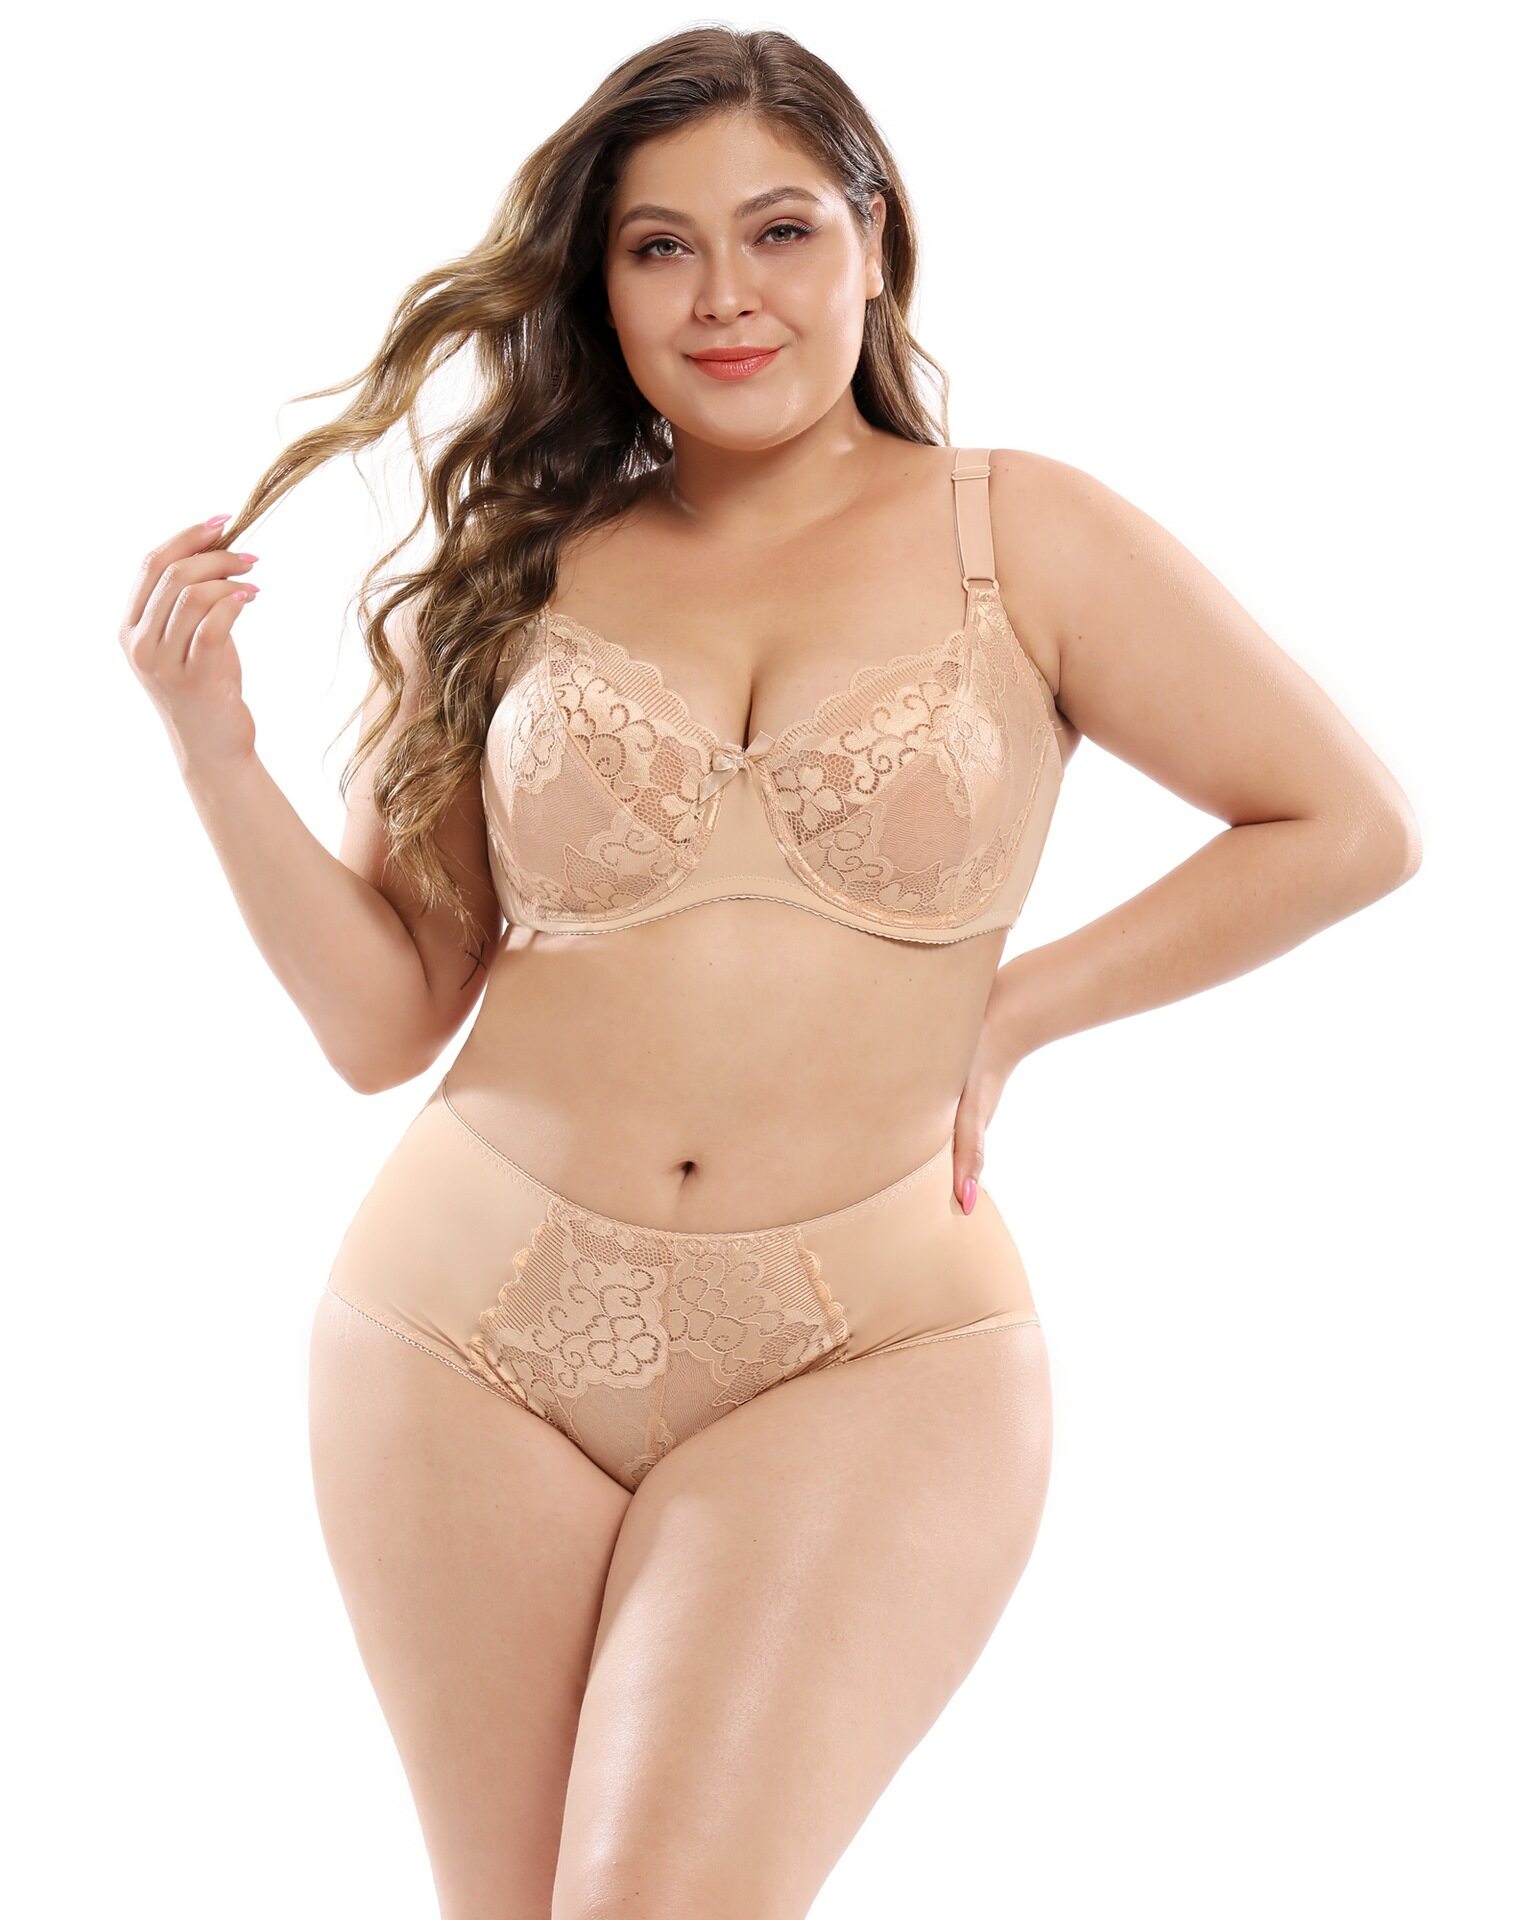 INTIMA 2024 Large Plus Size Bra and Panties Set for Women Size 36E-46E  Floral Lace Ultra-thin Underwear Ladies Bras Set Underwired Brassiere Push  Up Bralette